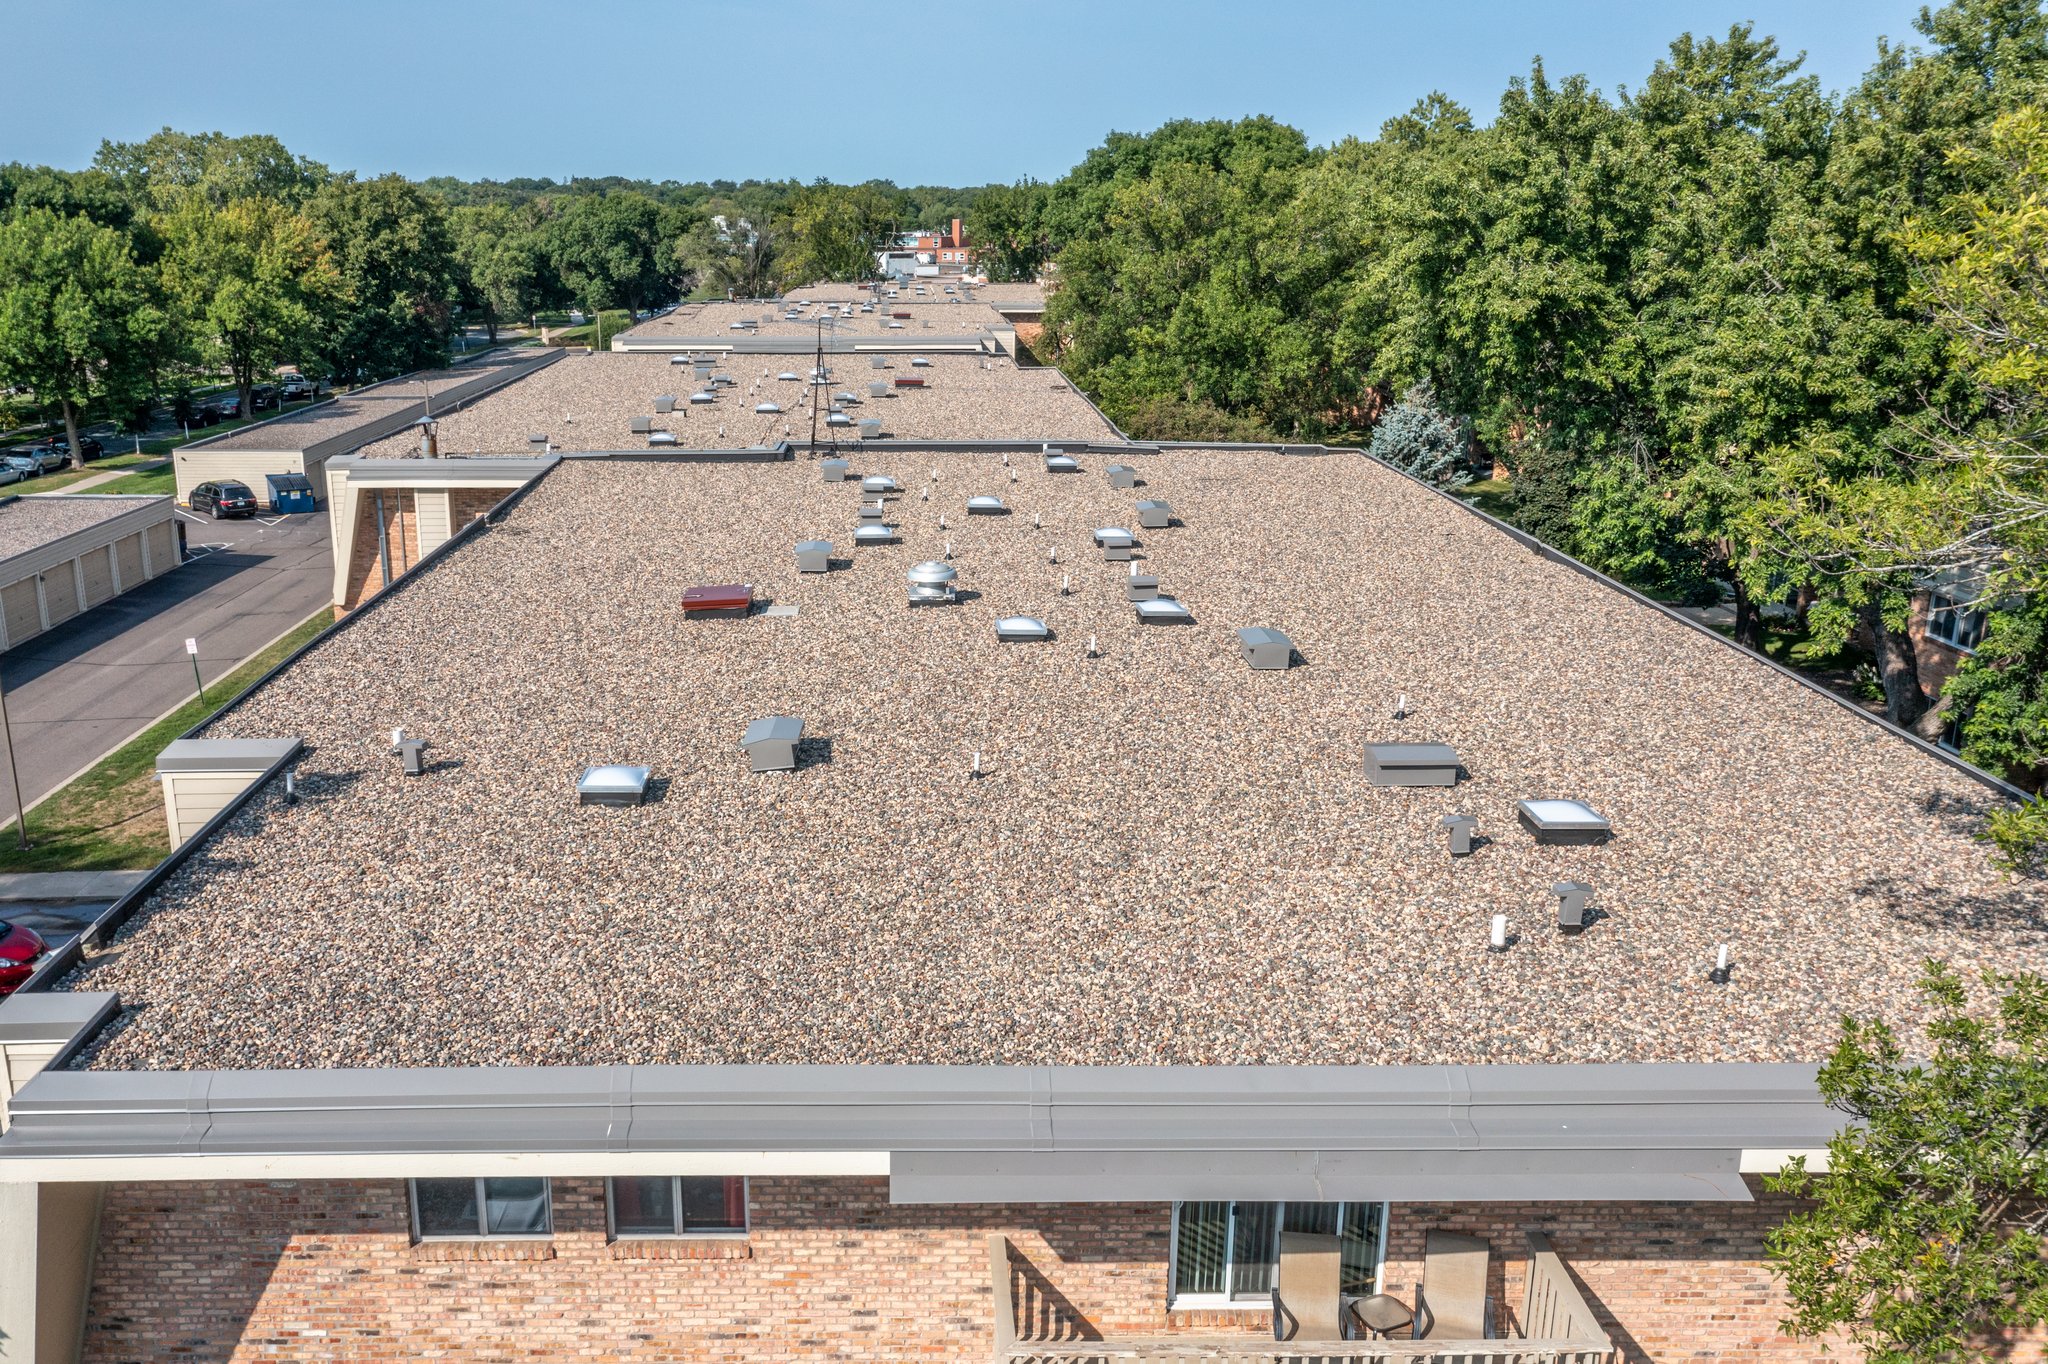 Commercial Roof Flashing 101: The Basics